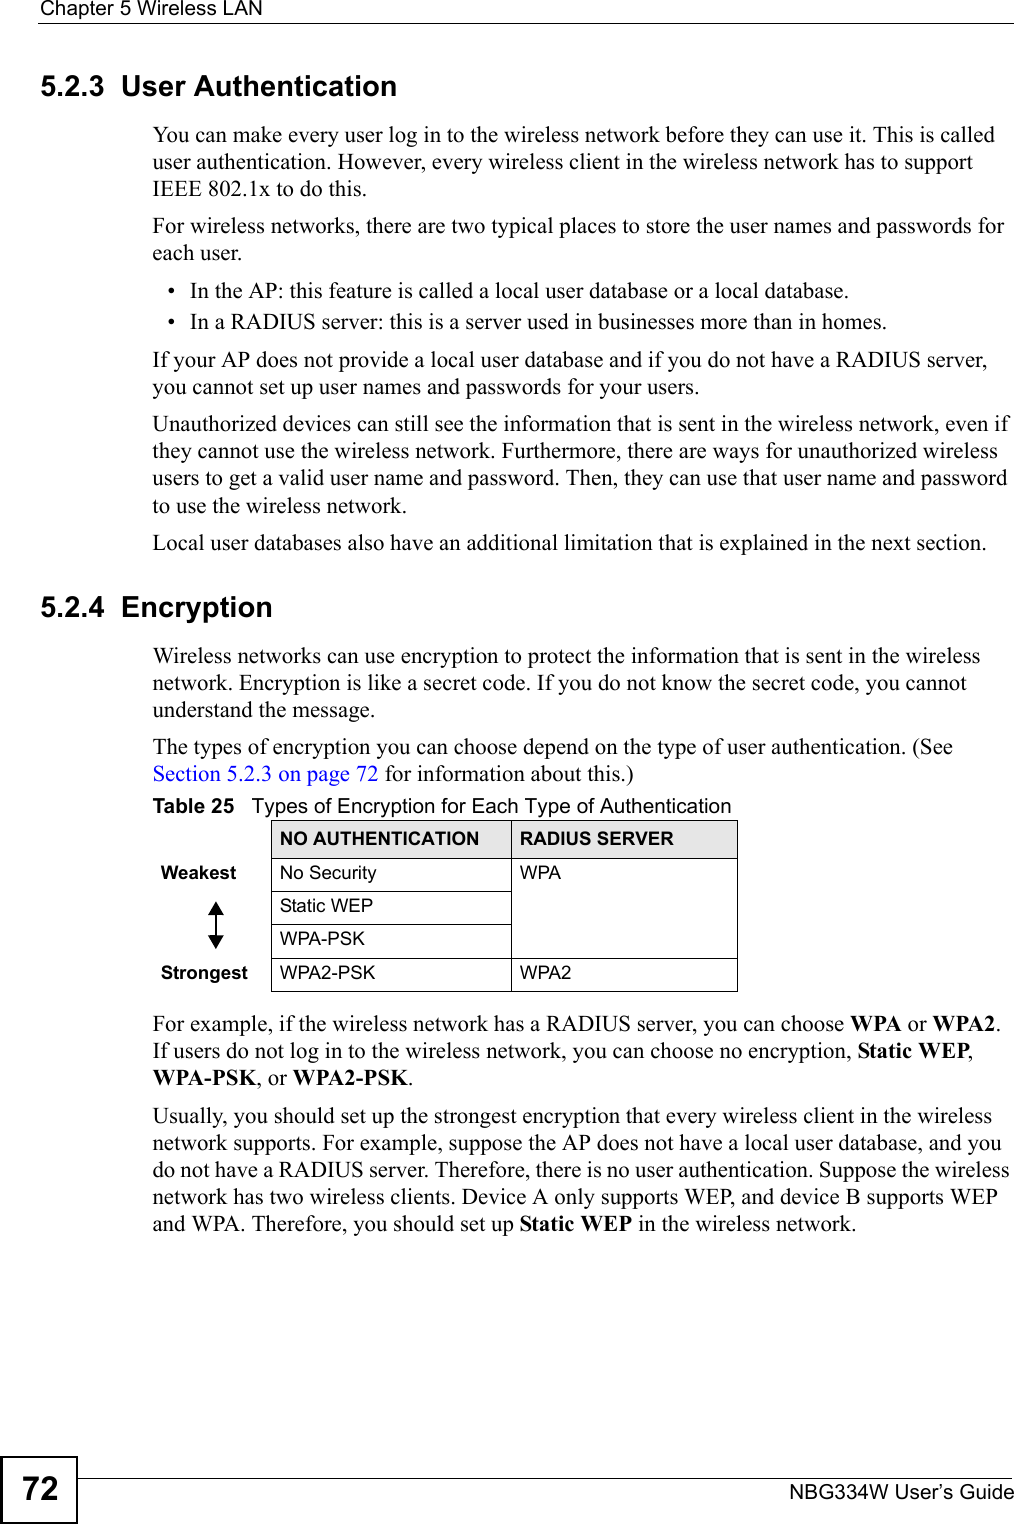 Chapter 5 Wireless LANNBG334W User’s Guide725.2.3  User AuthenticationYou can make every user log in to the wireless network before they can use it. This is called user authentication. However, every wireless client in the wireless network has to support IEEE 802.1x to do this.For wireless networks, there are two typical places to store the user names and passwords for each user.• In the AP: this feature is called a local user database or a local database.• In a RADIUS server: this is a server used in businesses more than in homes.If your AP does not provide a local user database and if you do not have a RADIUS server, you cannot set up user names and passwords for your users.Unauthorized devices can still see the information that is sent in the wireless network, even if they cannot use the wireless network. Furthermore, there are ways for unauthorized wireless users to get a valid user name and password. Then, they can use that user name and password to use the wireless network.Local user databases also have an additional limitation that is explained in the next section.5.2.4  EncryptionWireless networks can use encryption to protect the information that is sent in the wireless network. Encryption is like a secret code. If you do not know the secret code, you cannot understand the message.The types of encryption you can choose depend on the type of user authentication. (See Section 5.2.3 on page 72 for information about this.)For example, if the wireless network has a RADIUS server, you can choose WPA or WPA2. If users do not log in to the wireless network, you can choose no encryption, Static WEP, WPA-PSK, or WPA2-PSK.Usually, you should set up the strongest encryption that every wireless client in the wireless network supports. For example, suppose the AP does not have a local user database, and you do not have a RADIUS server. Therefore, there is no user authentication. Suppose the wireless network has two wireless clients. Device A only supports WEP, and device B supports WEP and WPA. Therefore, you should set up Static WEP in the wireless network.Table 25   Types of Encryption for Each Type of AuthenticationNO AUTHENTICATION RADIUS SERVERWeakest No Security WPAStatic WEPWPA-PSKStrongest WPA2-PSK WPA2